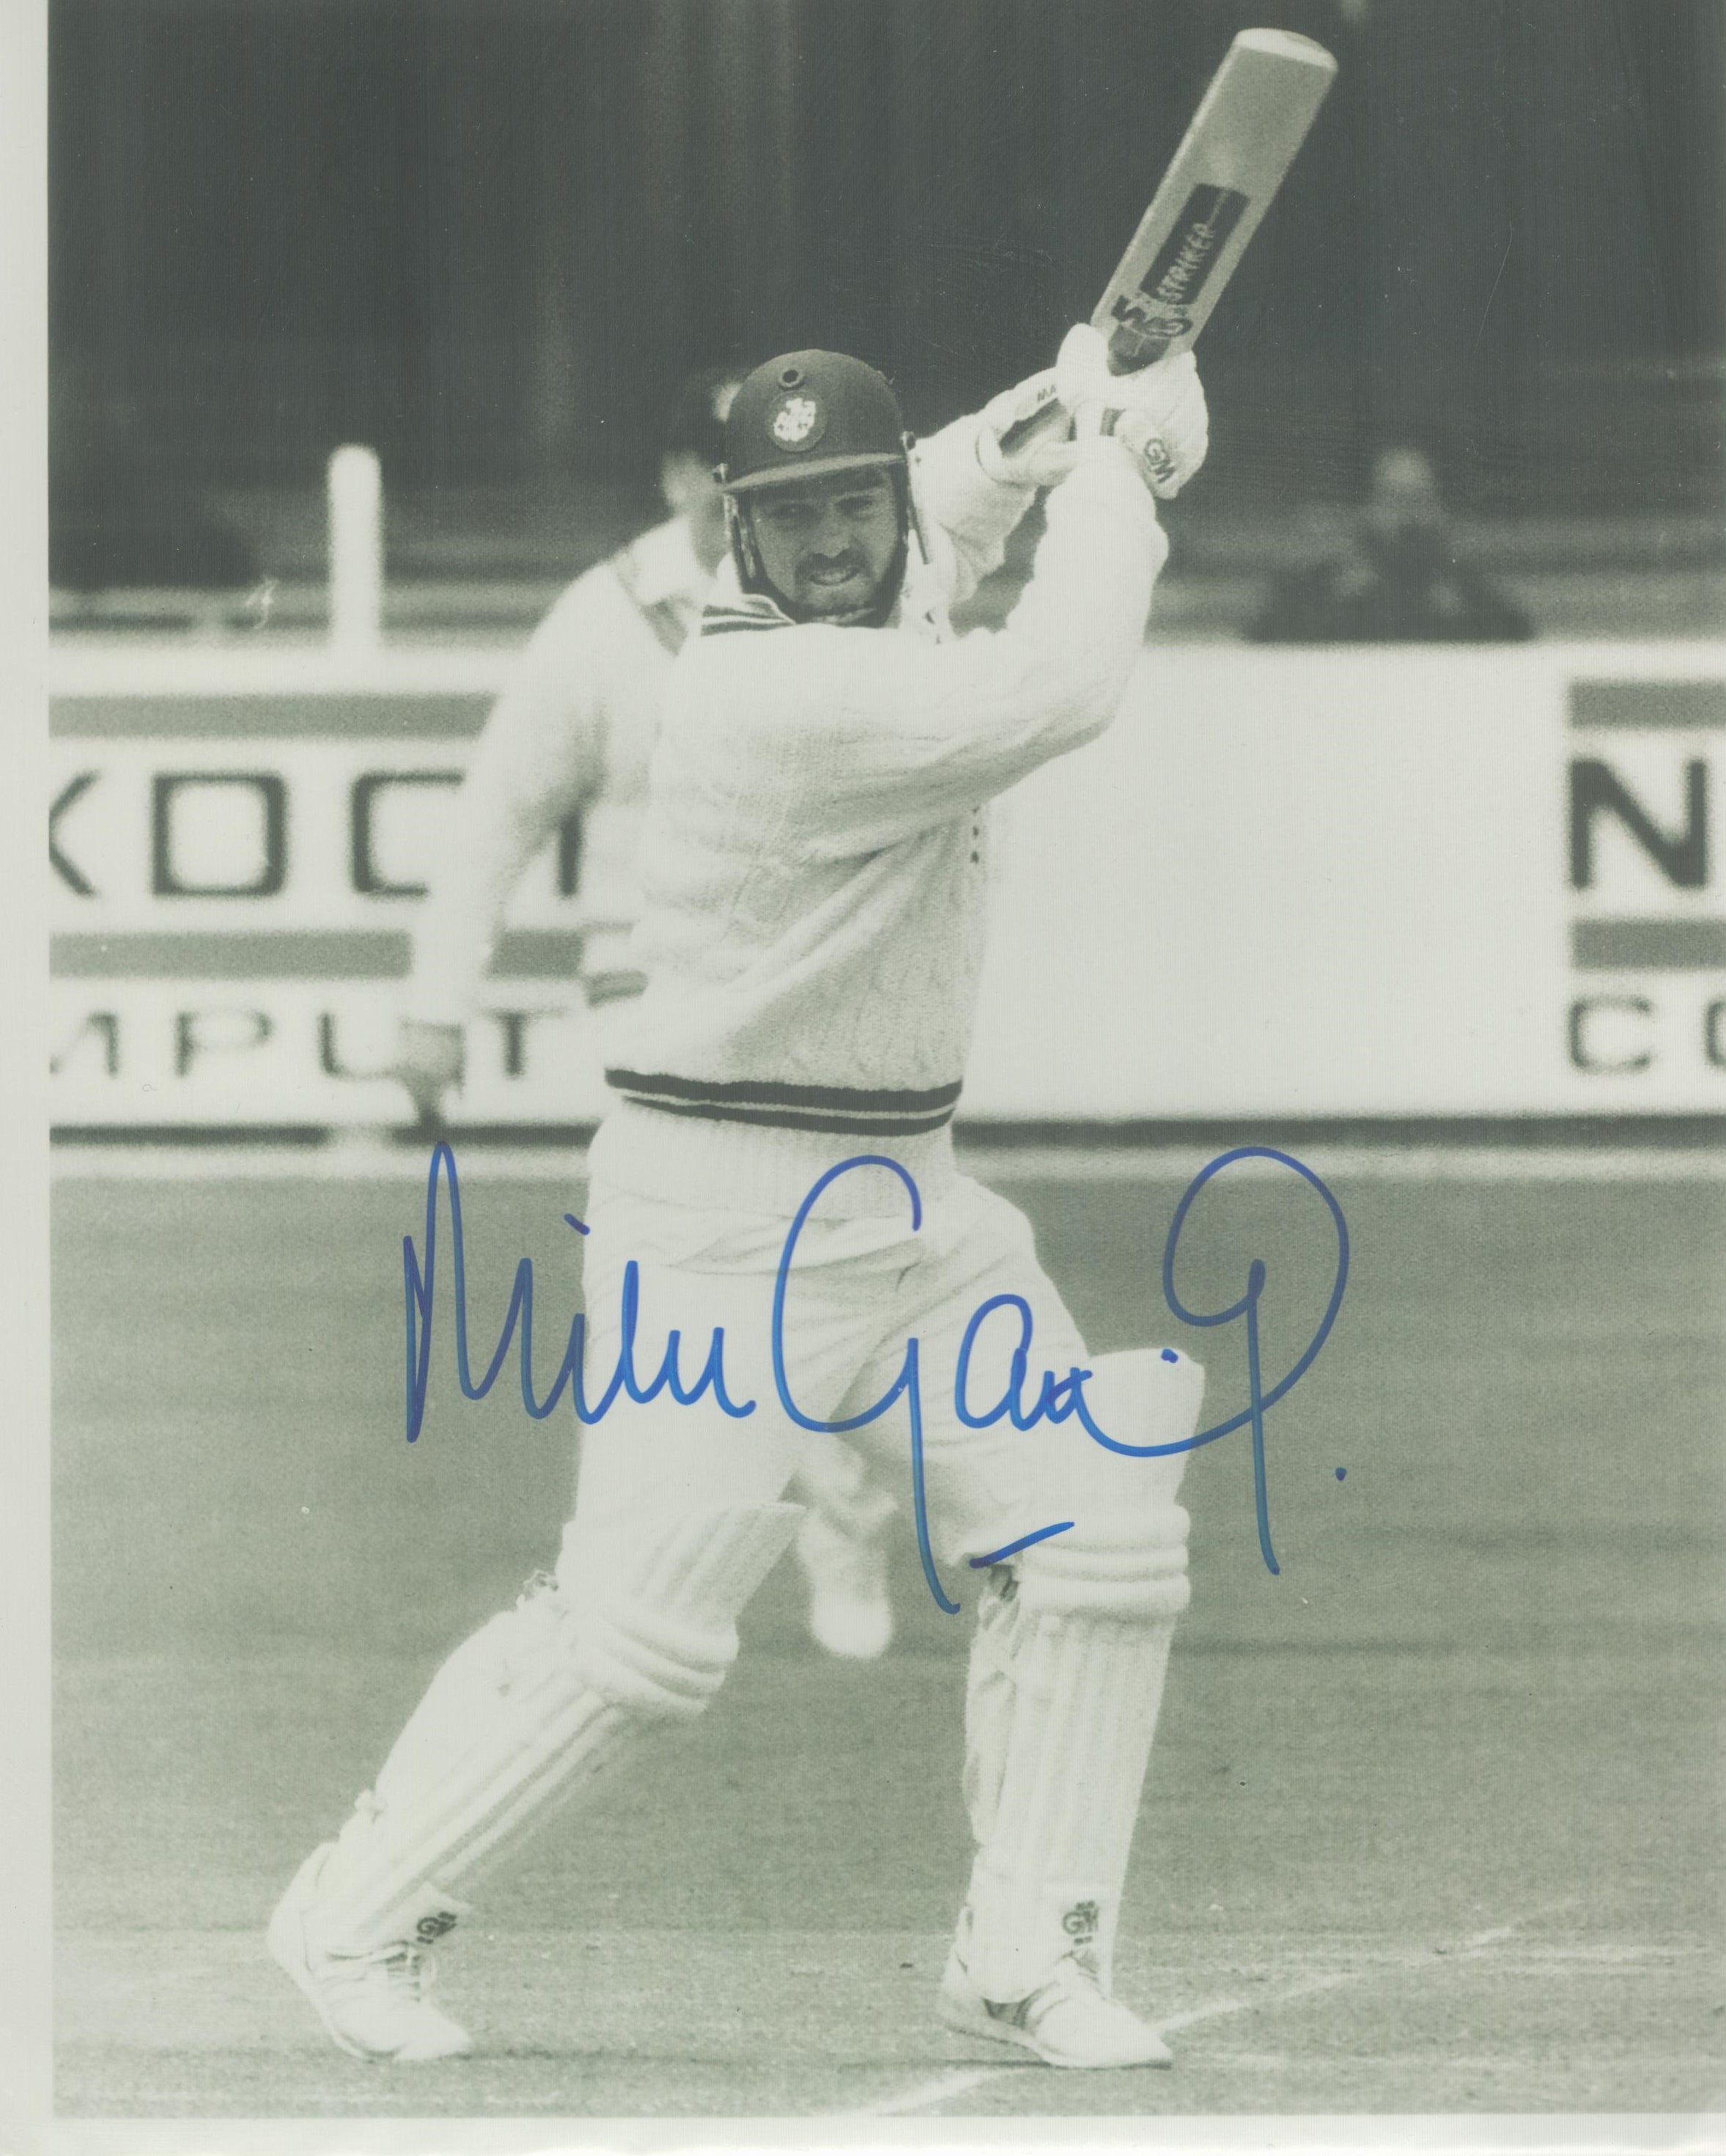 Cricket Mike Gatting signed 10x8 inch black and white photo. Good condition. All autographs are